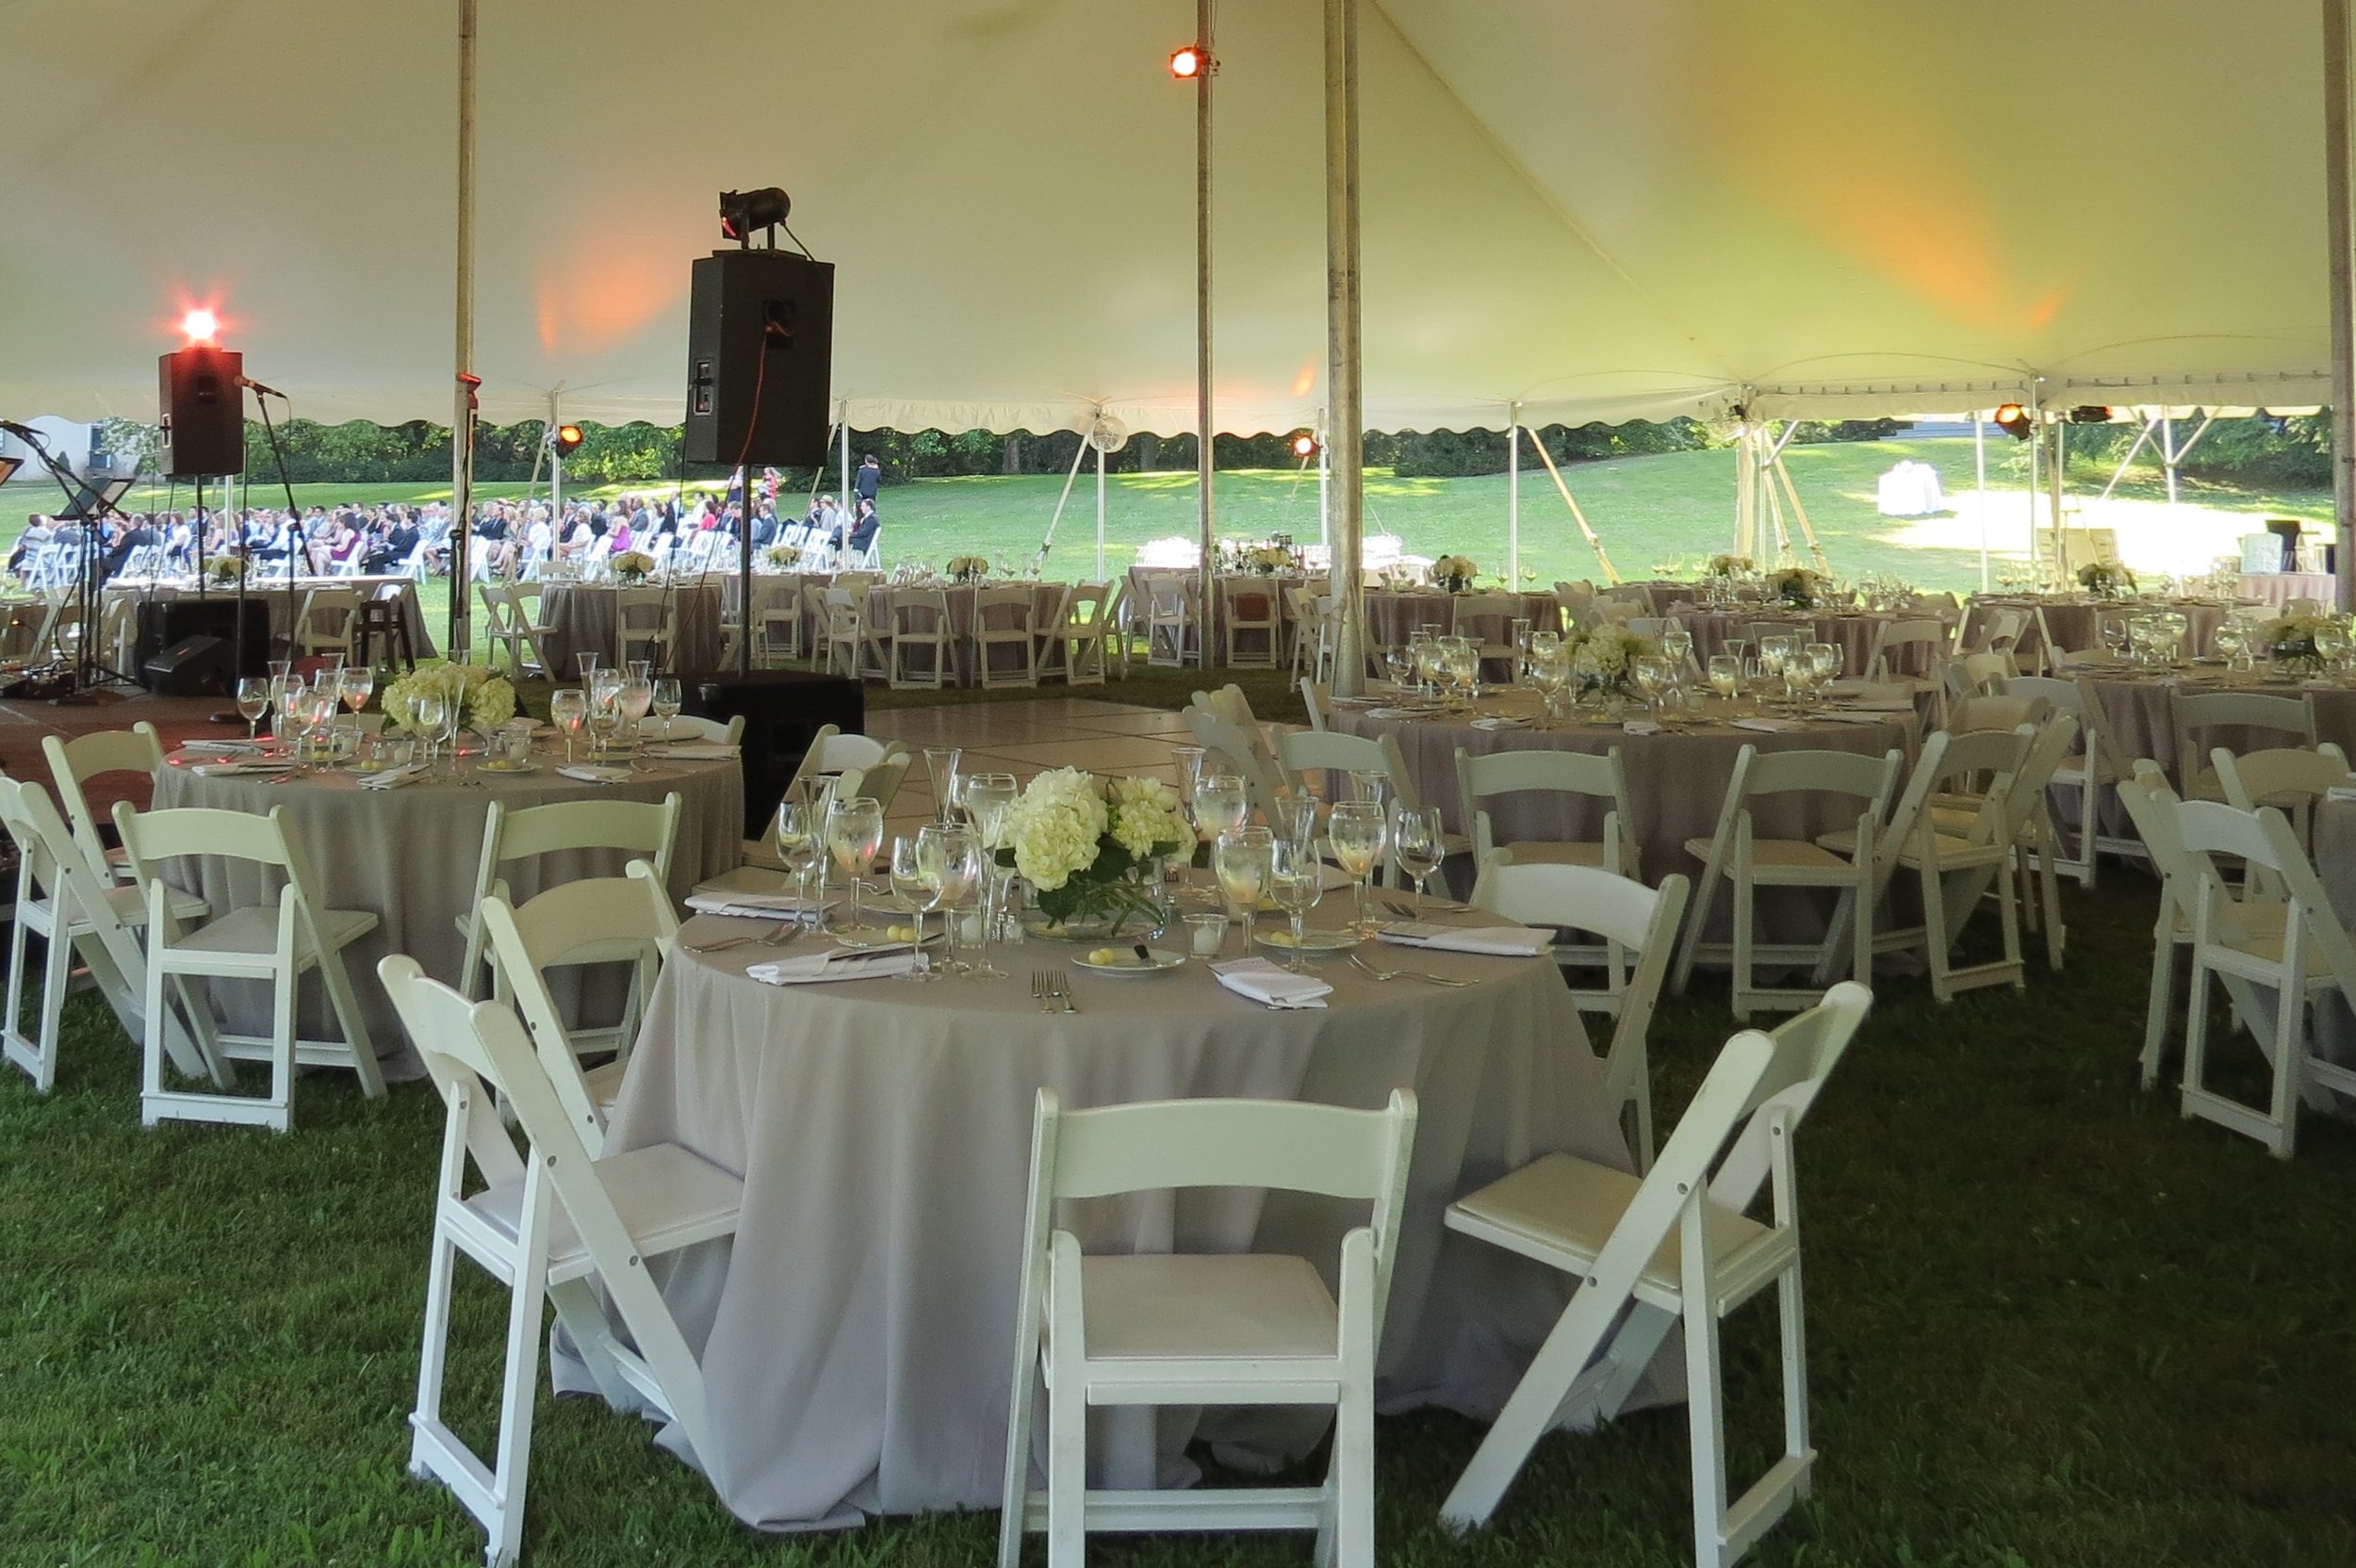 Round tables in a tent